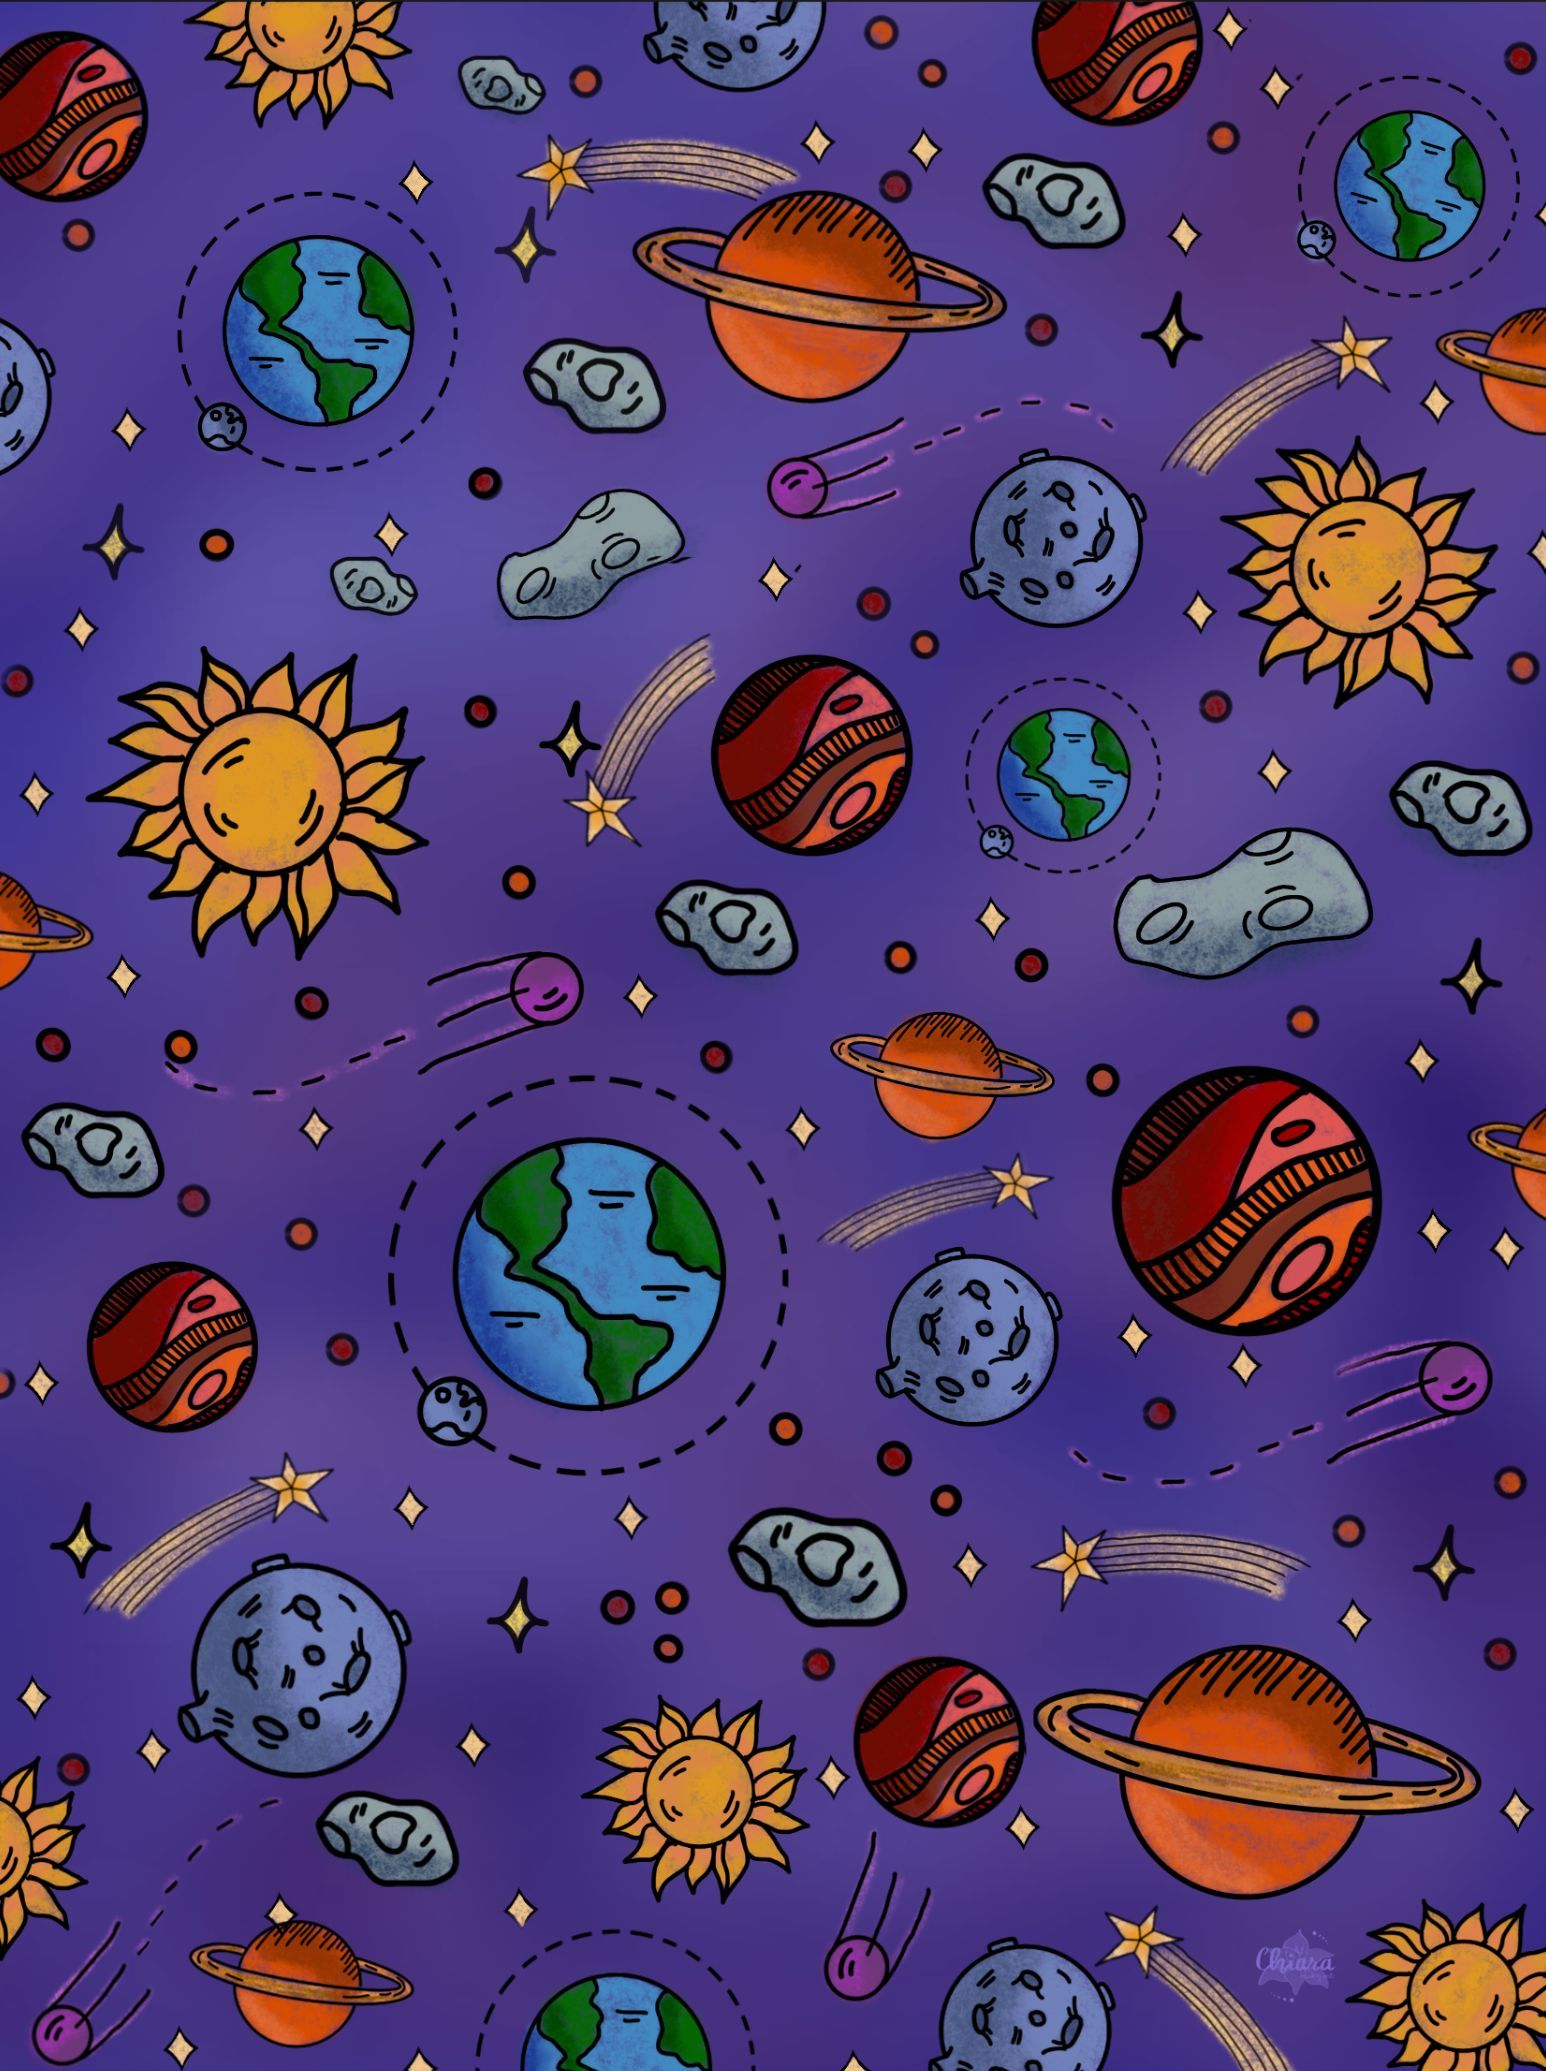 An illustration of the solar system with a purple background - Doodles, space